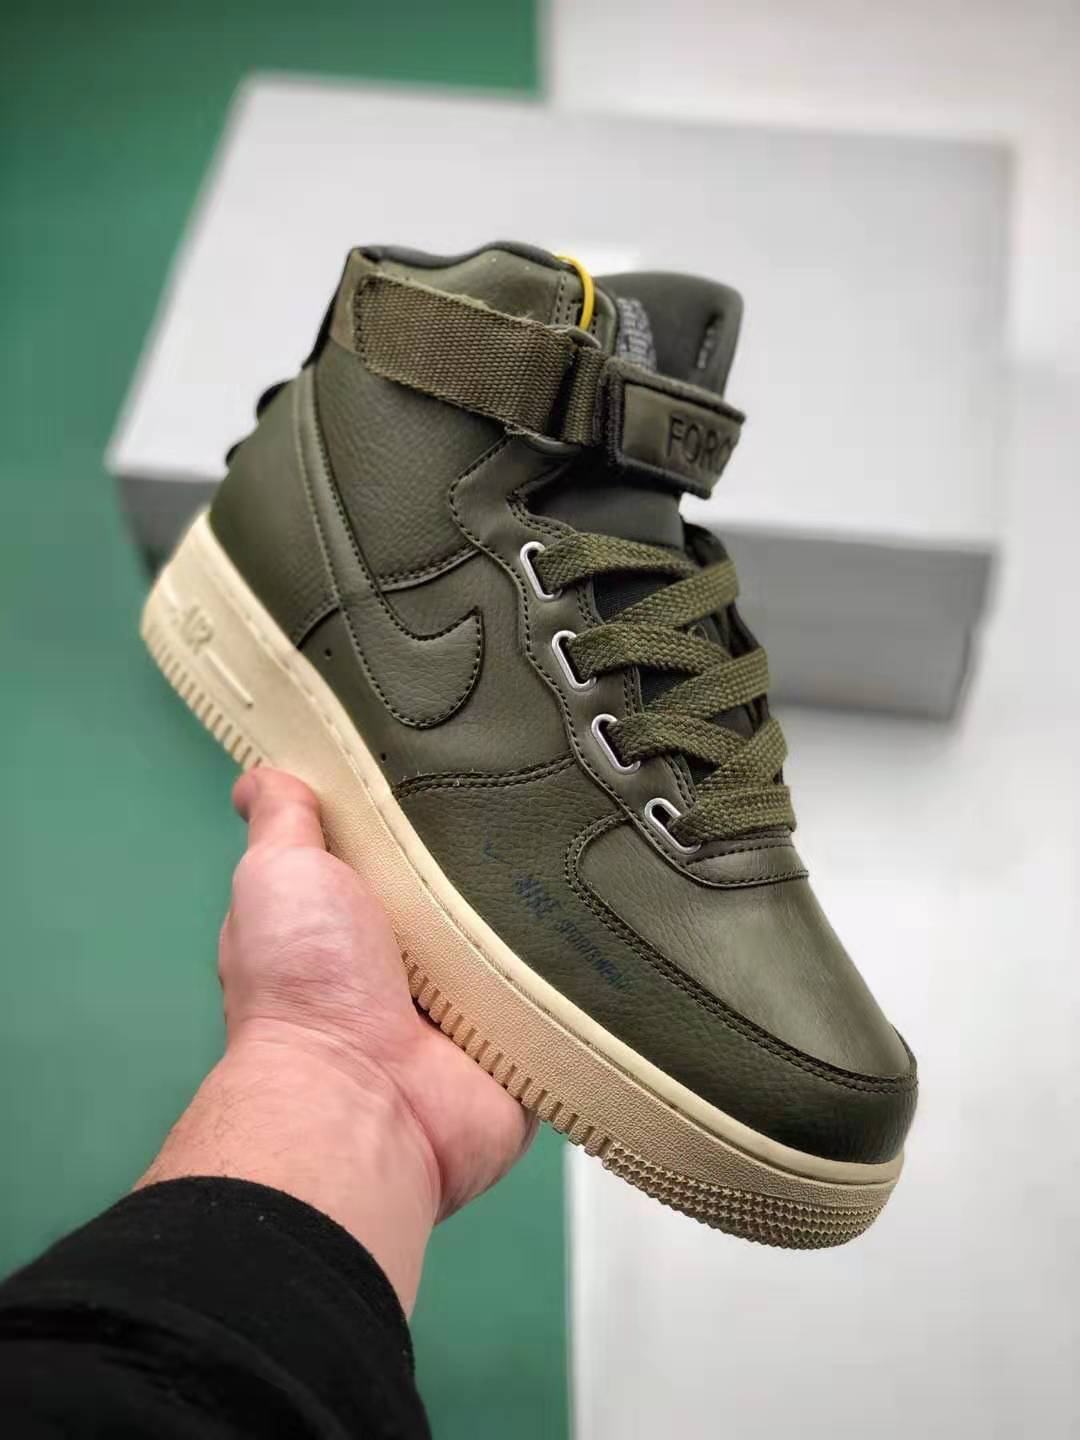 Nike Air Force 1 High Utility Olive Canvas AJ7311-300 - Stylish and Functional Women's Sneakers